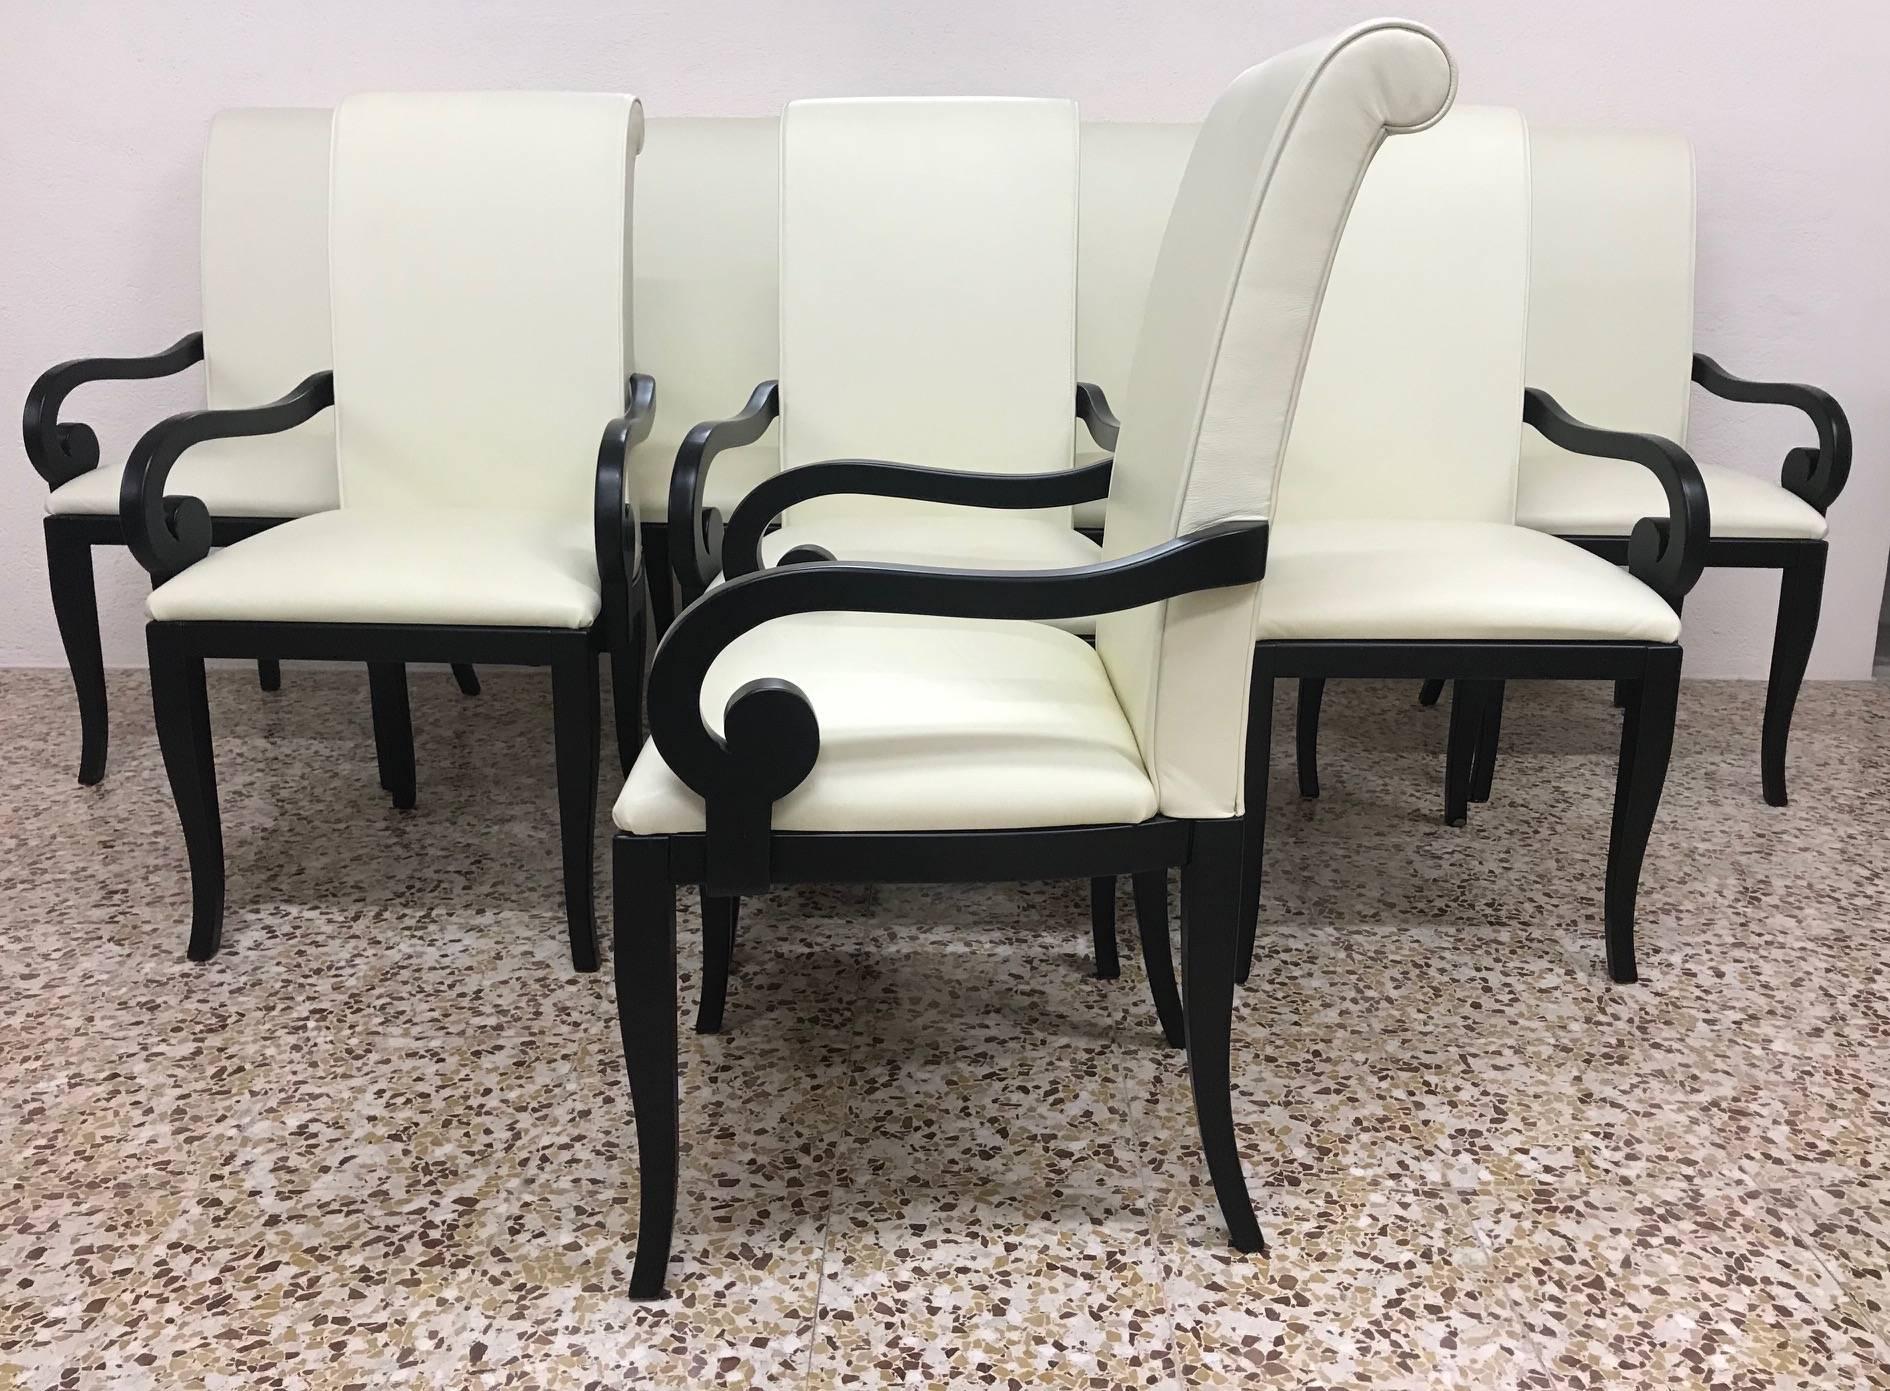 Set of six Art Deco inspired dining chairs, upholstered in fine ivory Italian leather.
The structure is made of black lacquered wood.